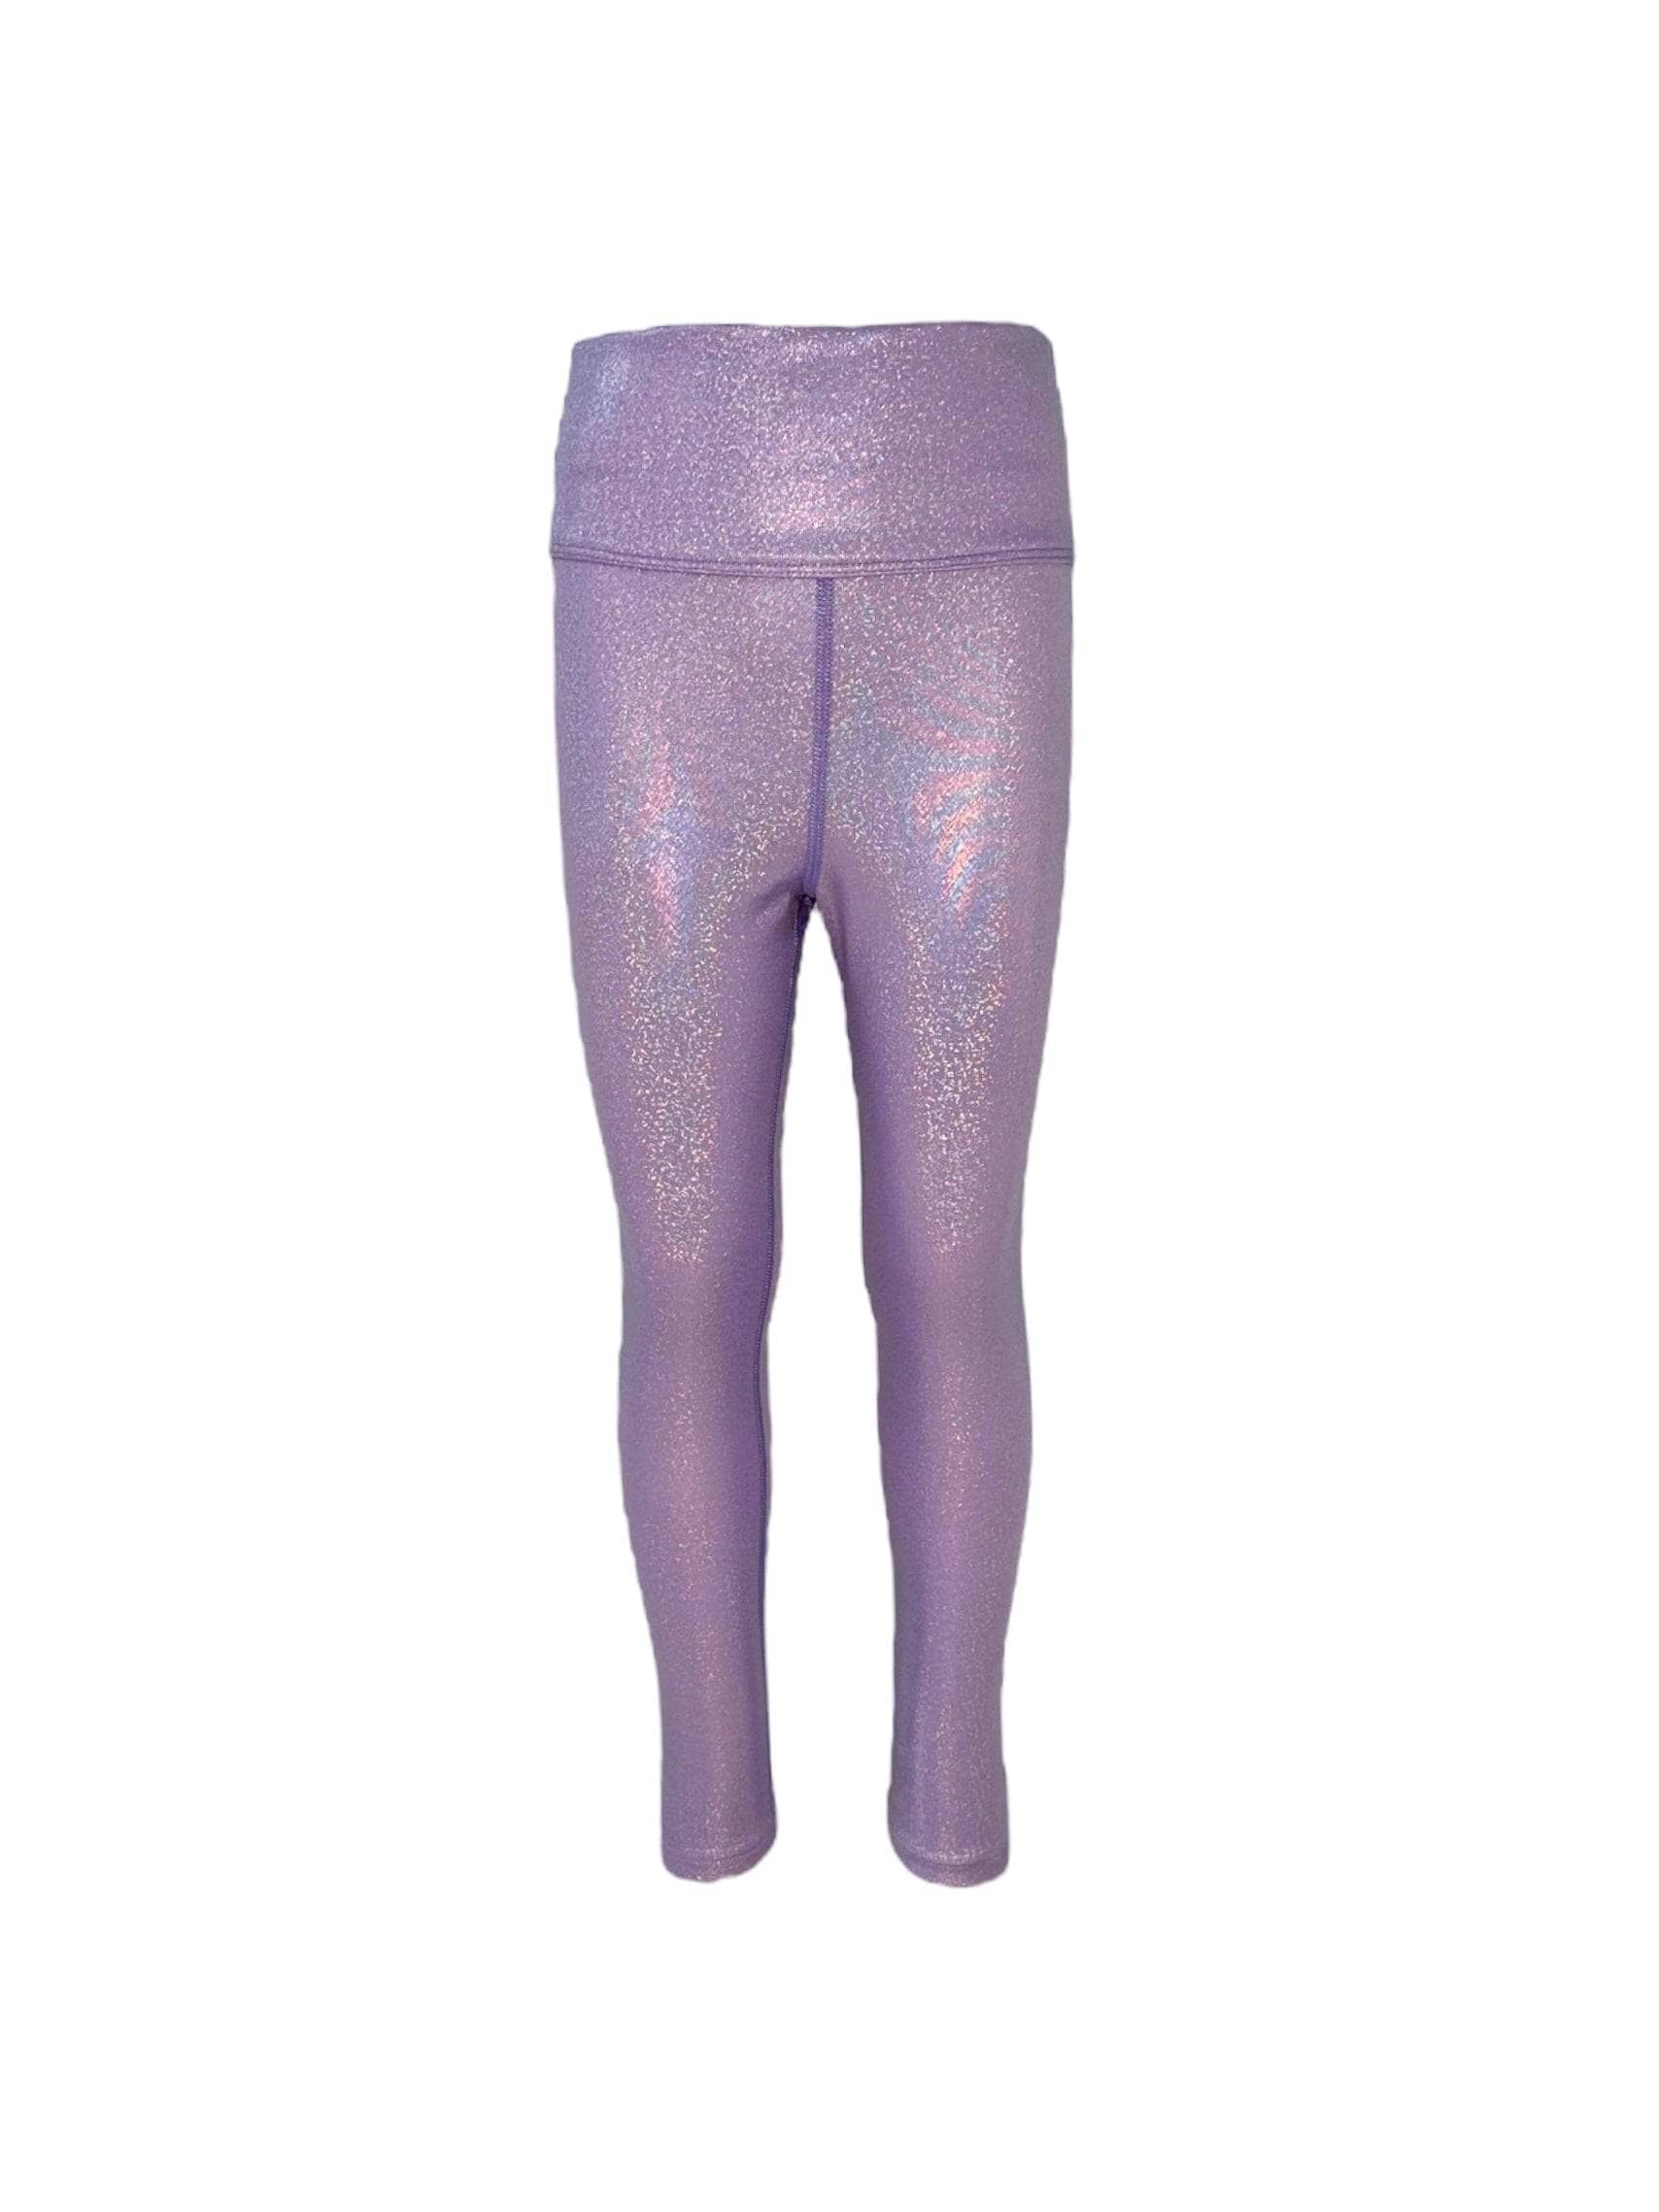 Pink Sparkle Youth Girls Leggings/Tights